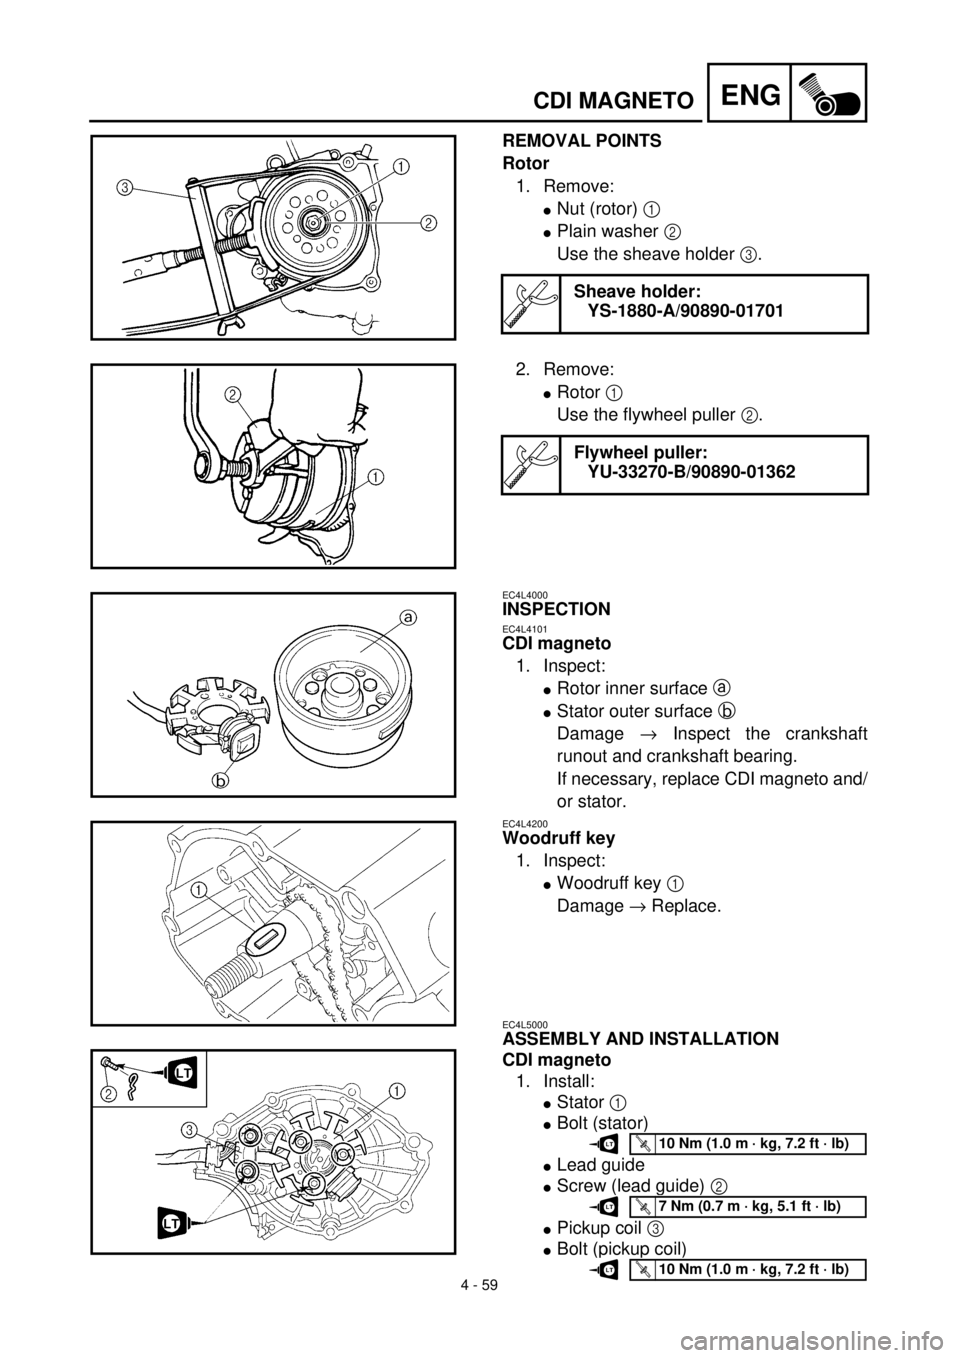 YAMAHA TTR125 2002  Owners Manual 4 - 59
ENGCDI MAGNETO
REMOVAL POINTS
Rotor
1. Remove:
lNut (rotor) 1 
lPlain washer 2 
Use the sheave holder 3.
Sheave holder:
YS-1880-A/90890-01701
2. Remove:
lRotor 1 
Use the flywheel puller 2.
Fly